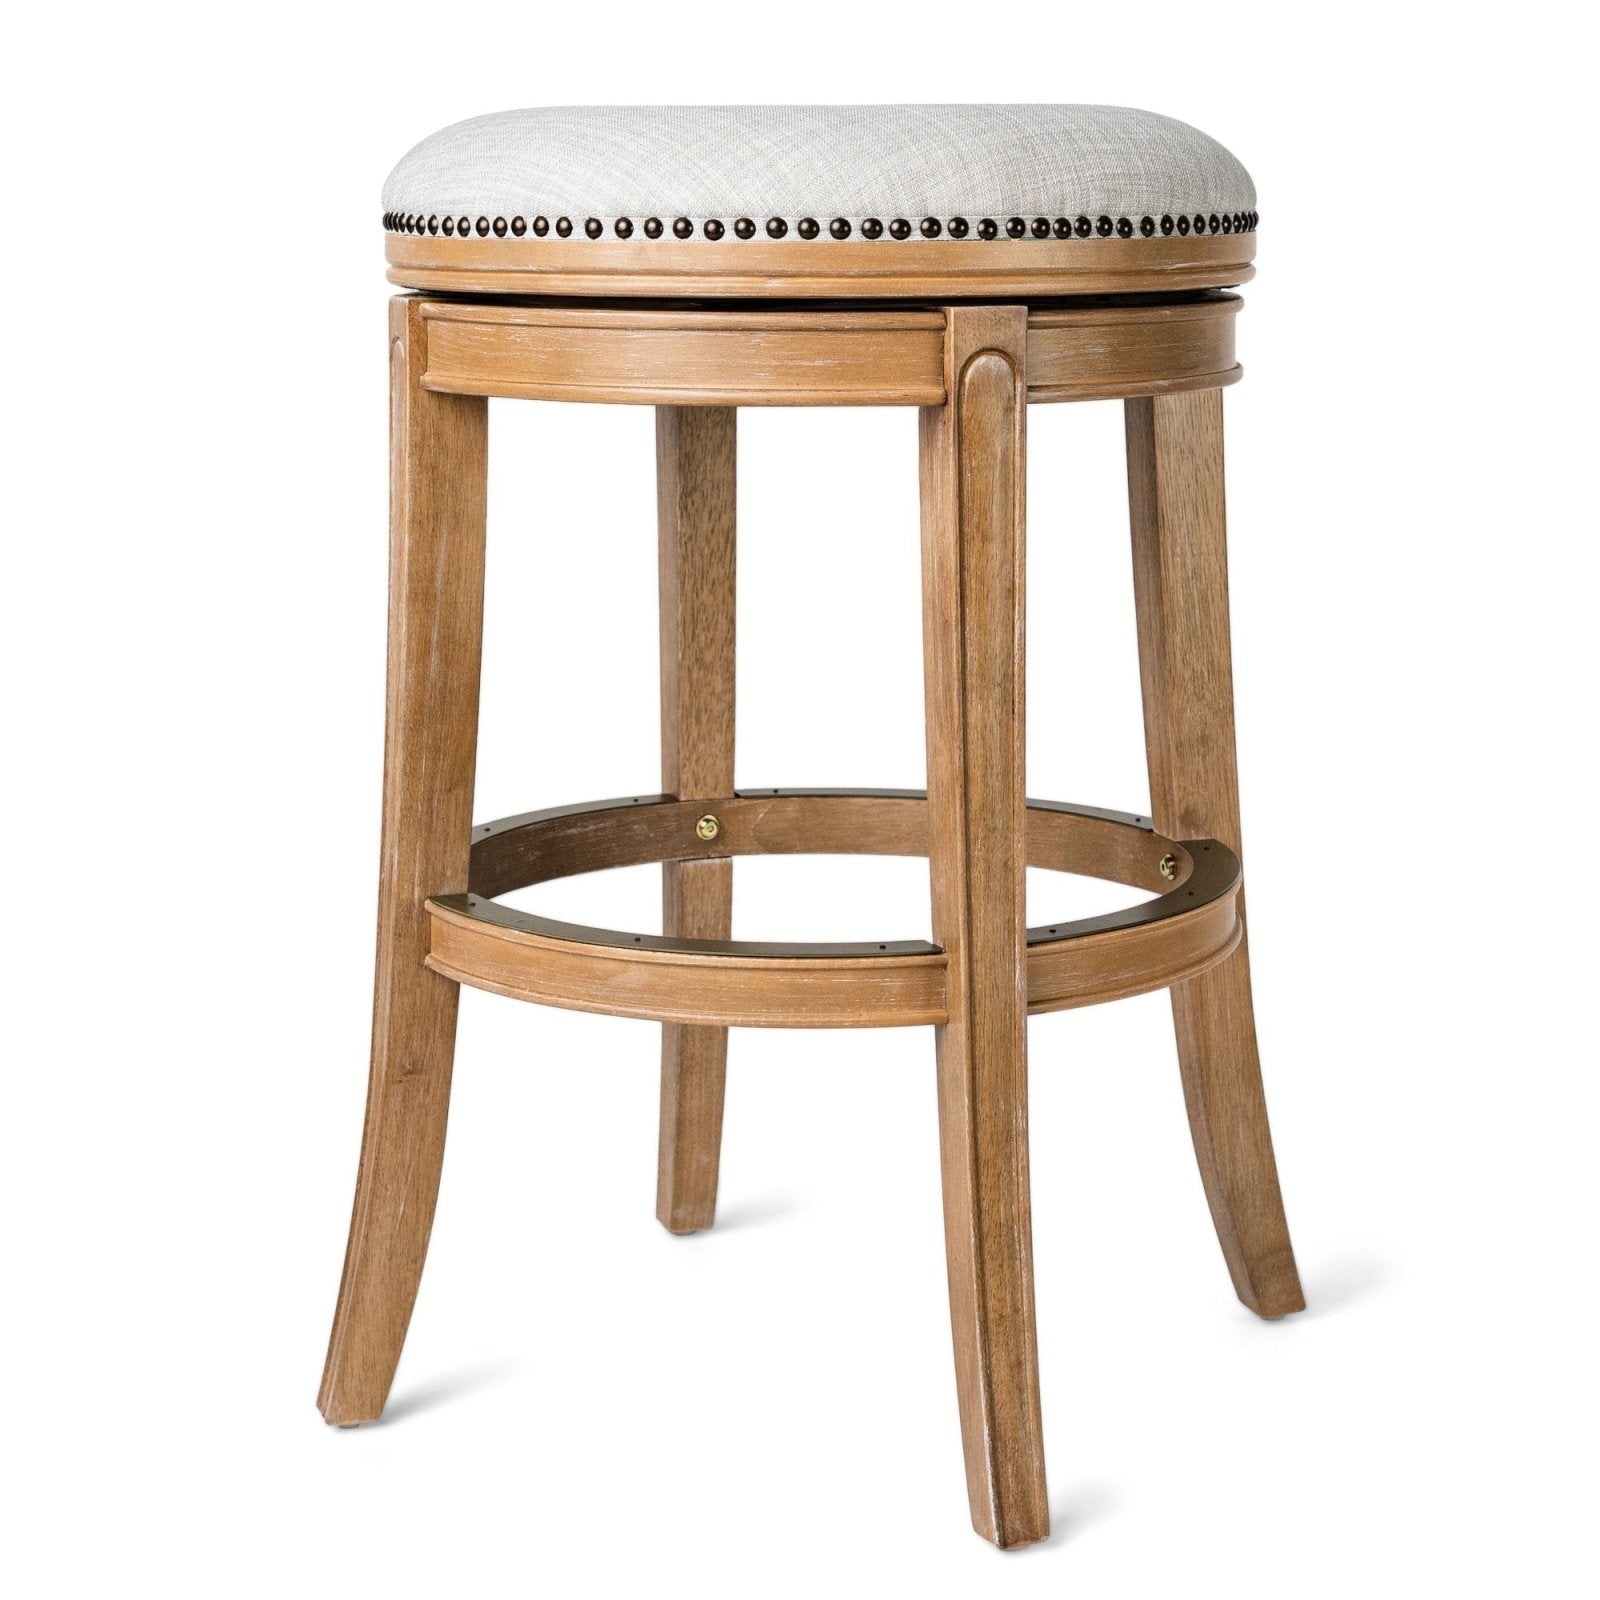 Alexander Backless Bar Stool in Weathered Oak Finish w/ Sand Color Fabric Upholstery